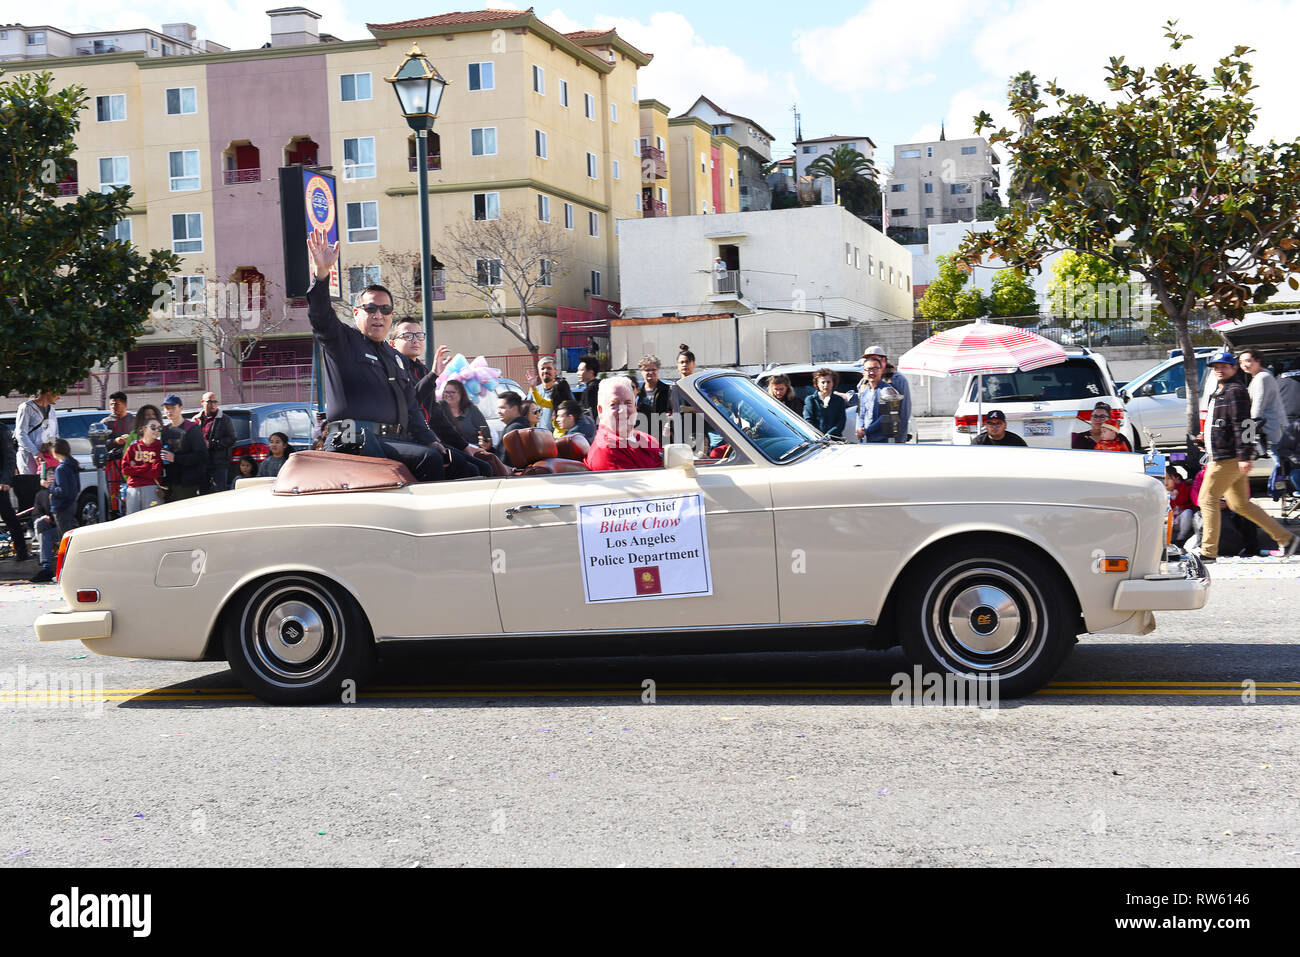 LOS ANGELES - Februar 9, 2019: LAPD stellvertretender Chief Blake Chow Ausritte in die Chinese New Year Parade. Stockfoto